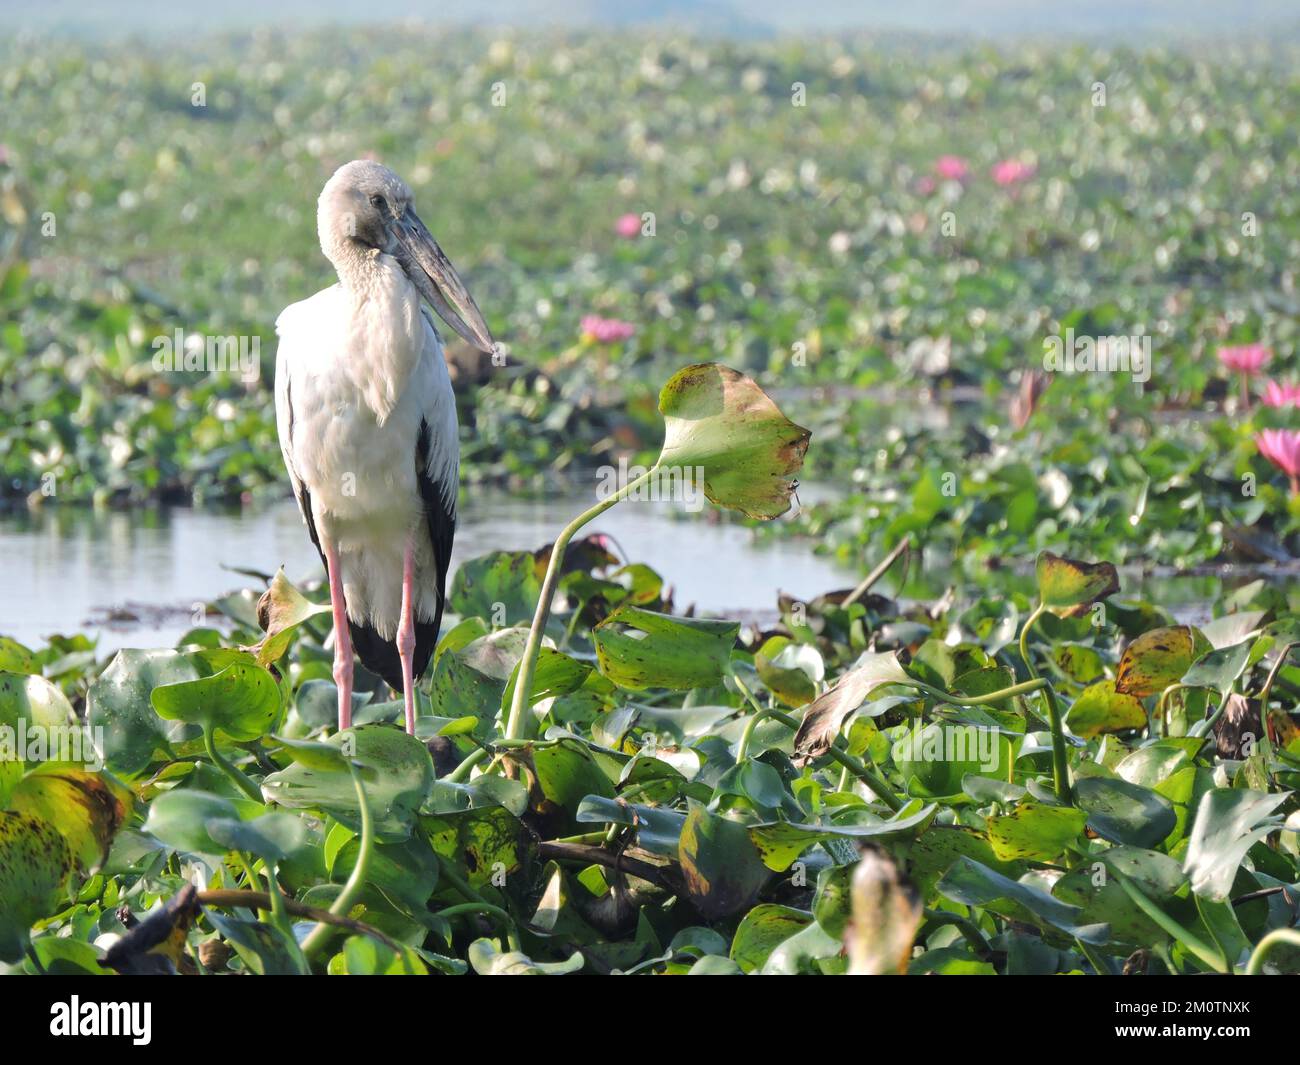 Asian openbill stork (Anastomus oscitans) is a large wading bird in the stork family Ciconiidae. Stock Photo